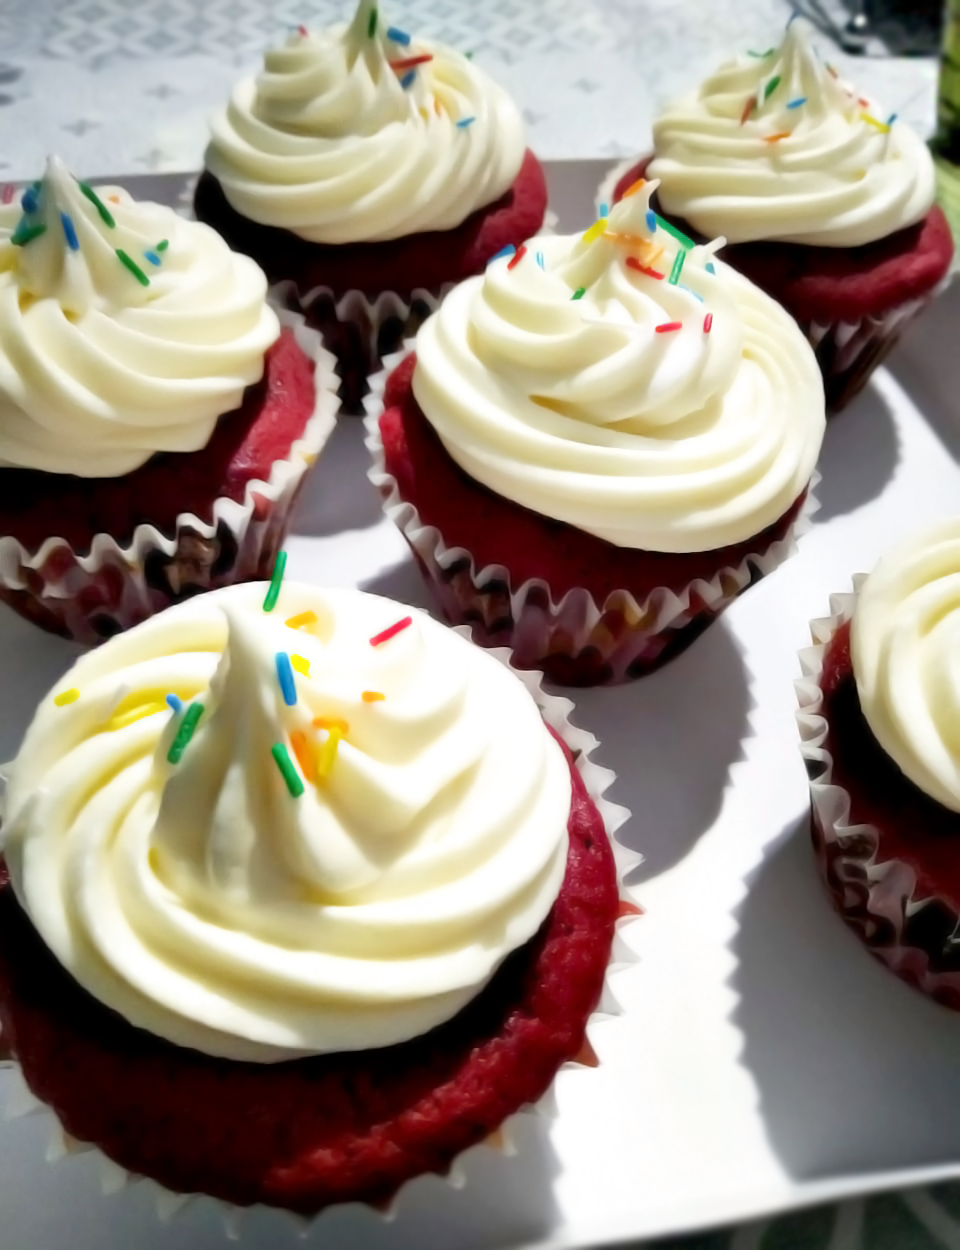 cupcakes-red-velvet1672604677.png